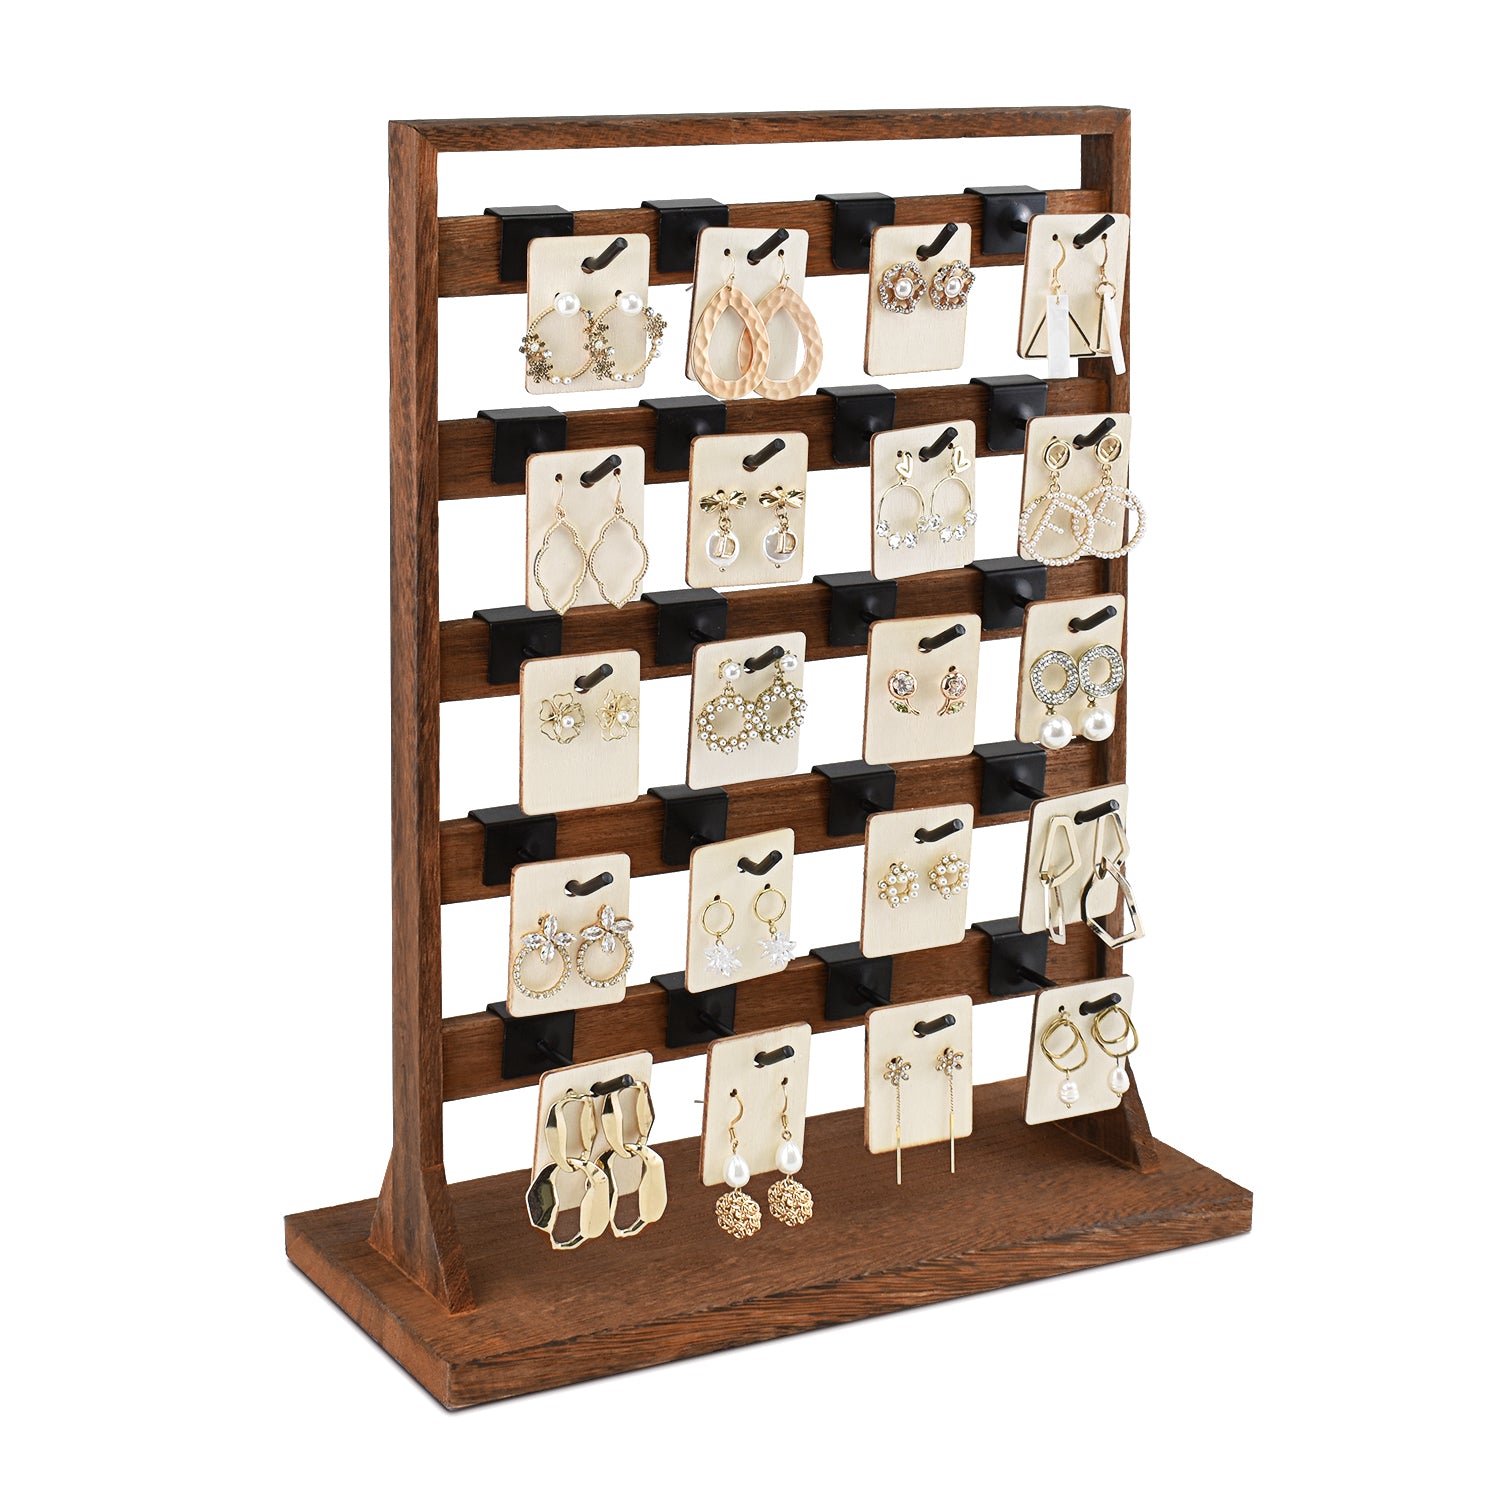 Ikee Design® Wooden jewelry rack with 20 hooks